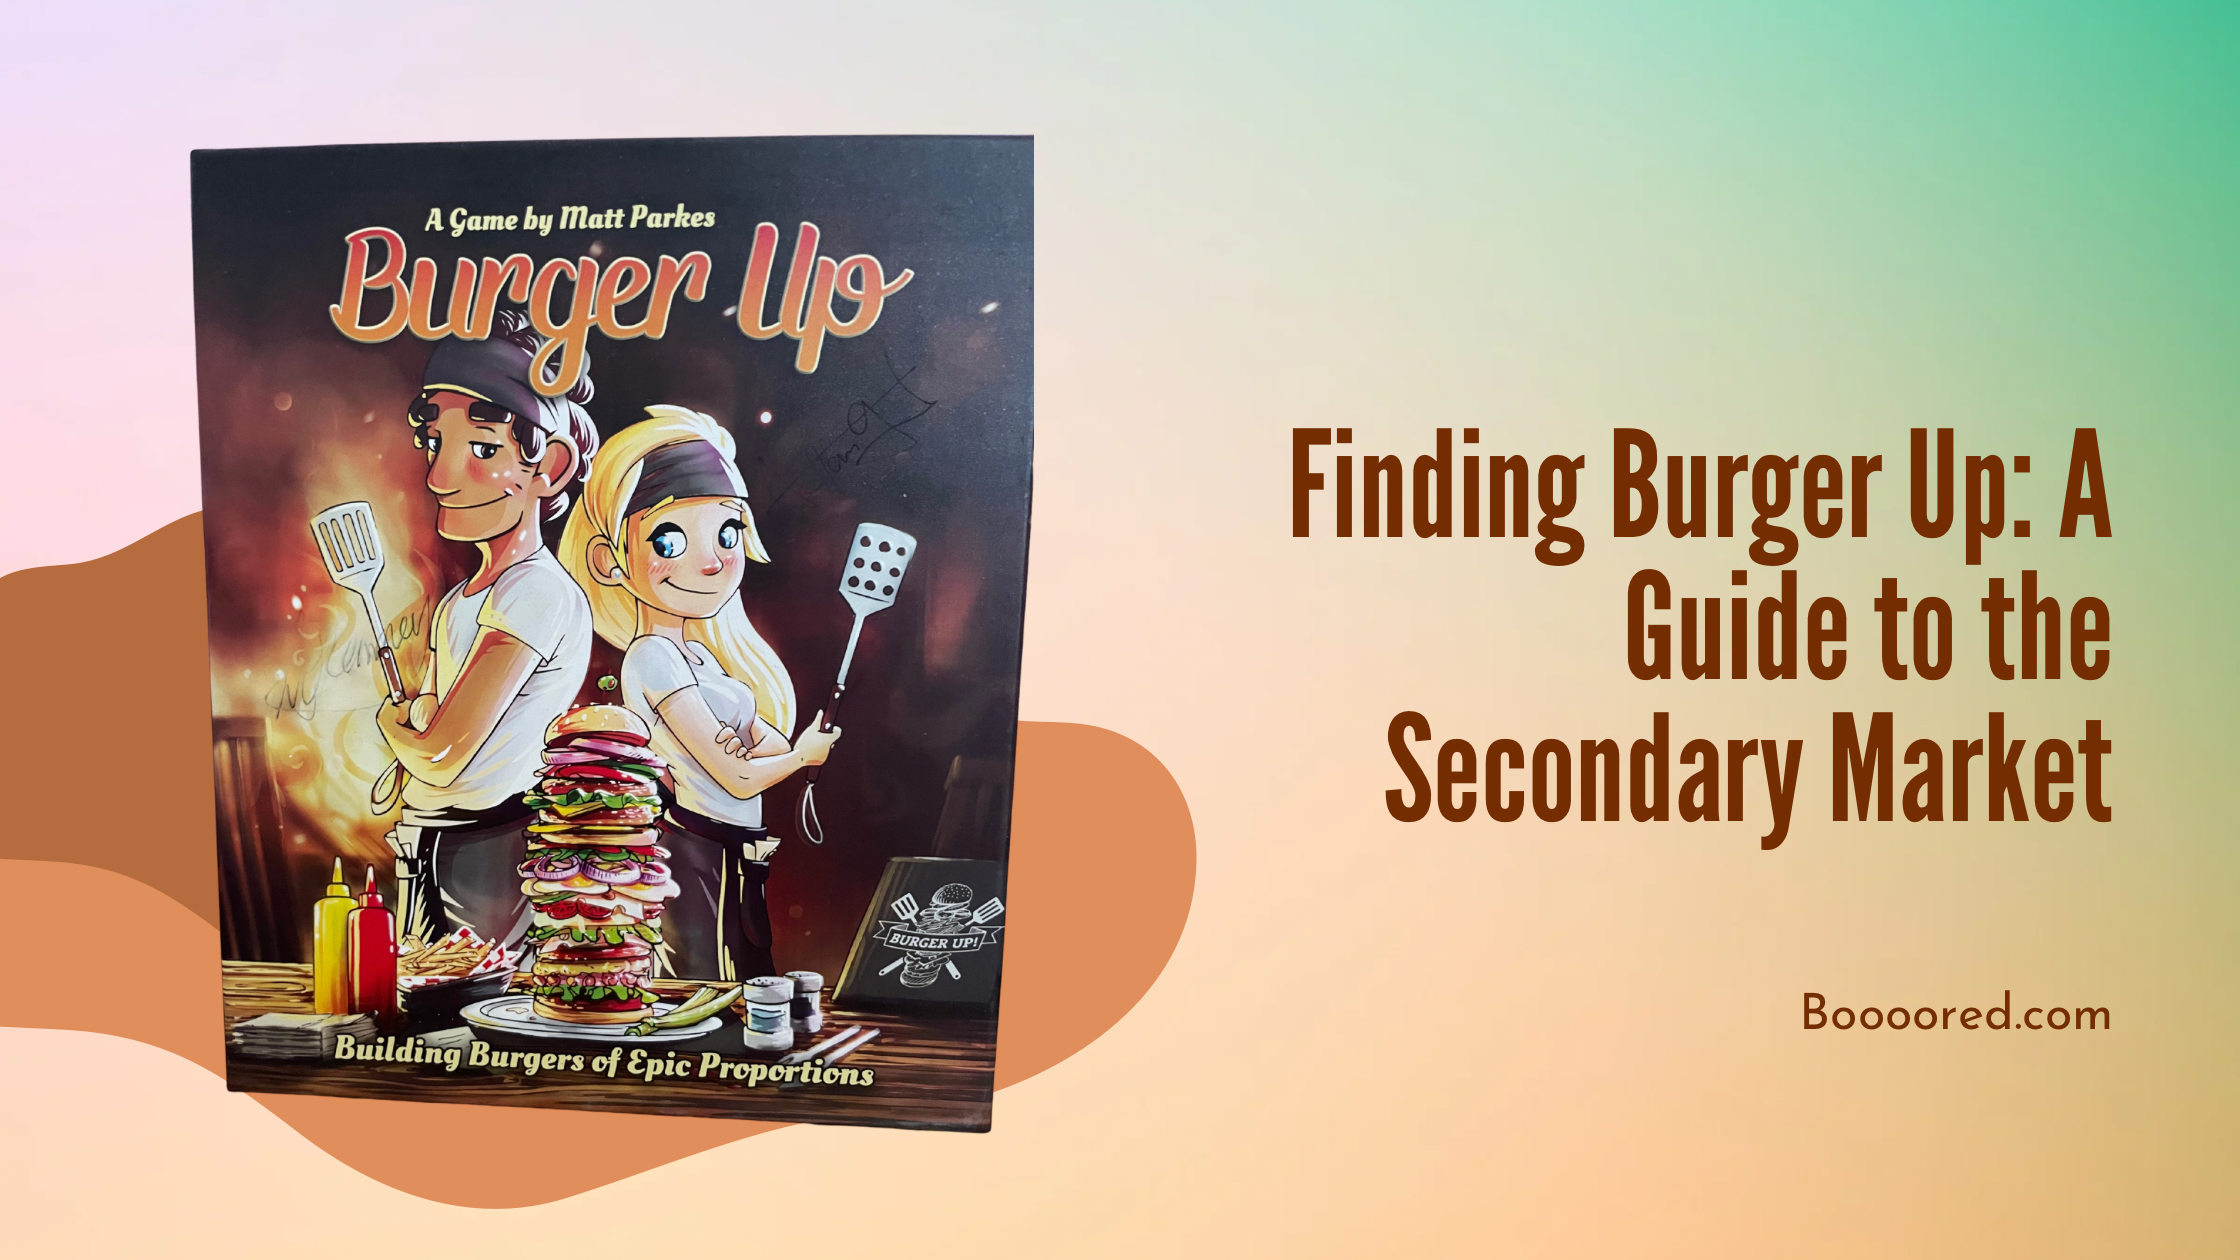 Finding Burger Up: A Guide to the Secondary Market